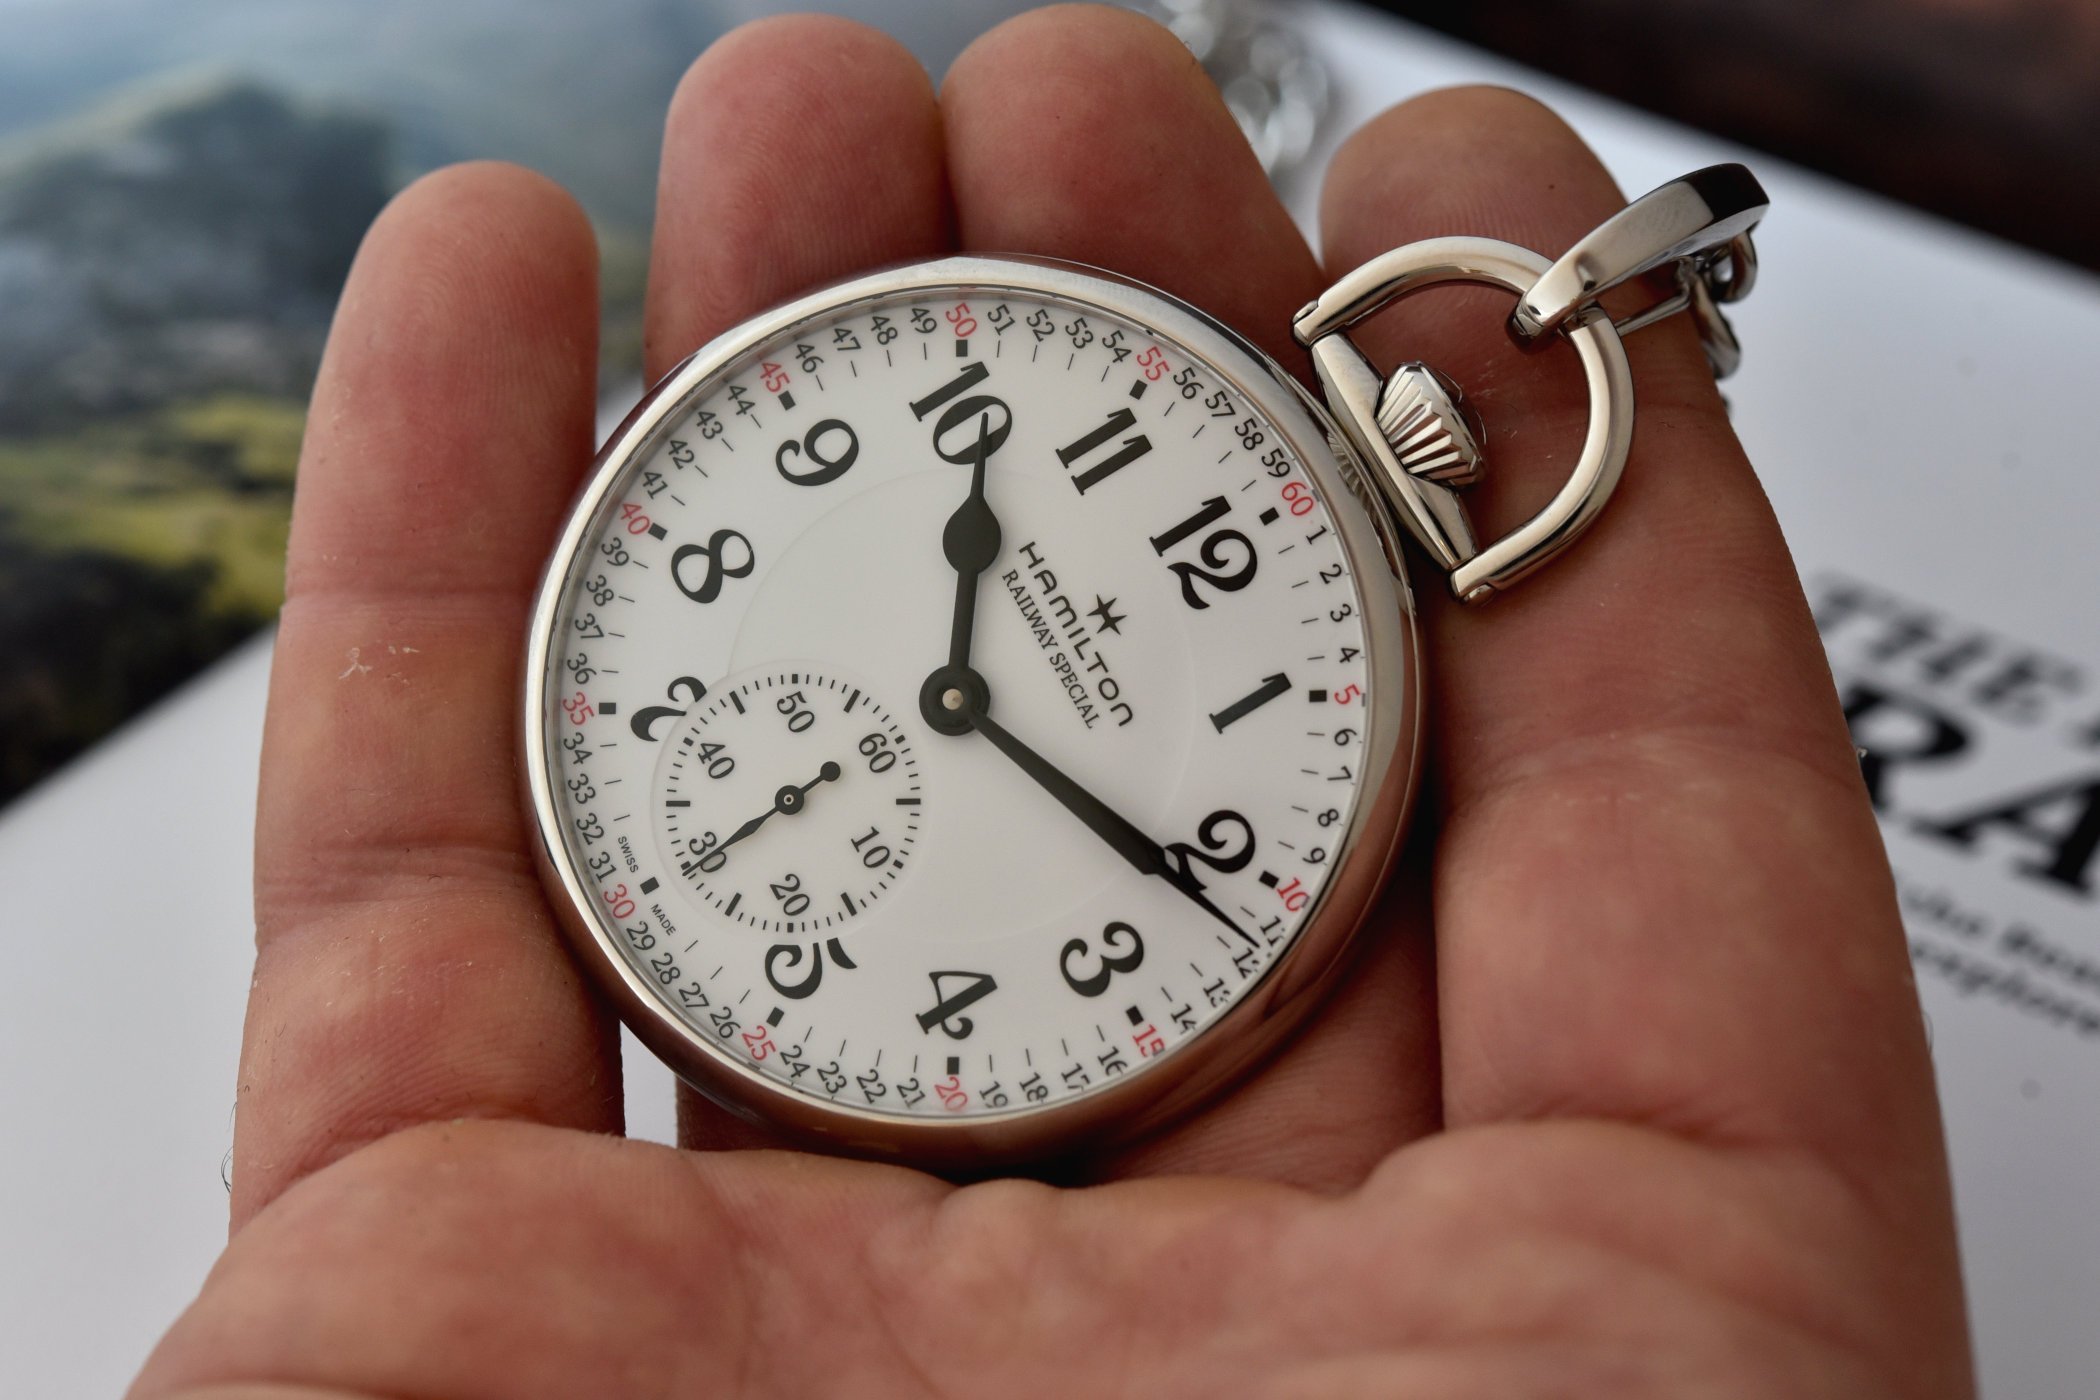 Railroad Grade Pocket Watches Explained | The Vortic Blog